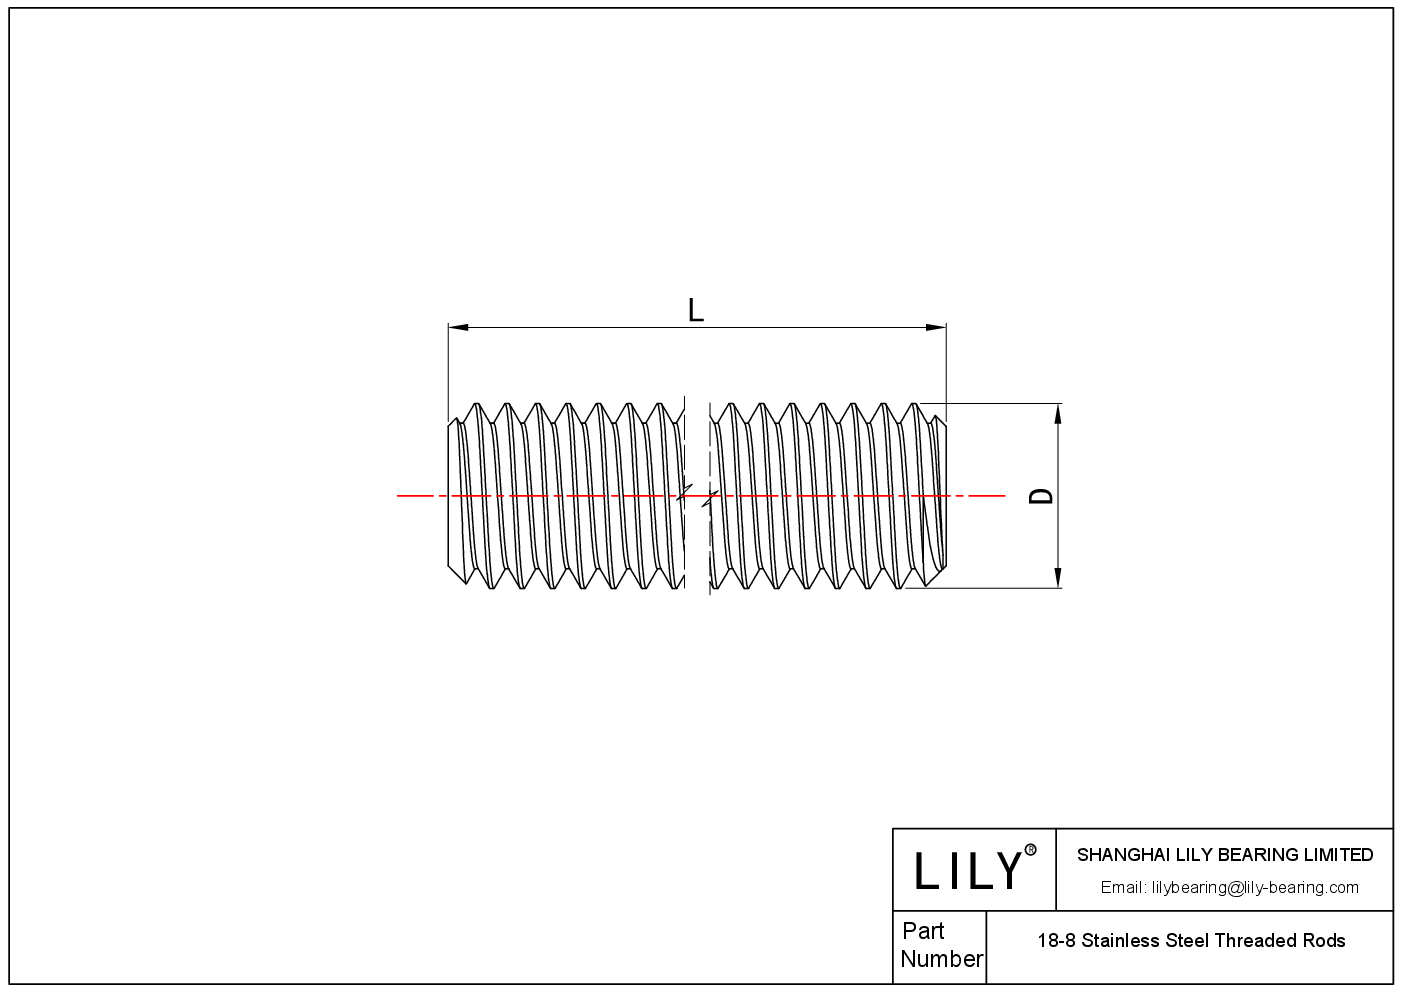 JFEBCAIGB 18-8 Stainless Steel Threaded Rods cad drawing